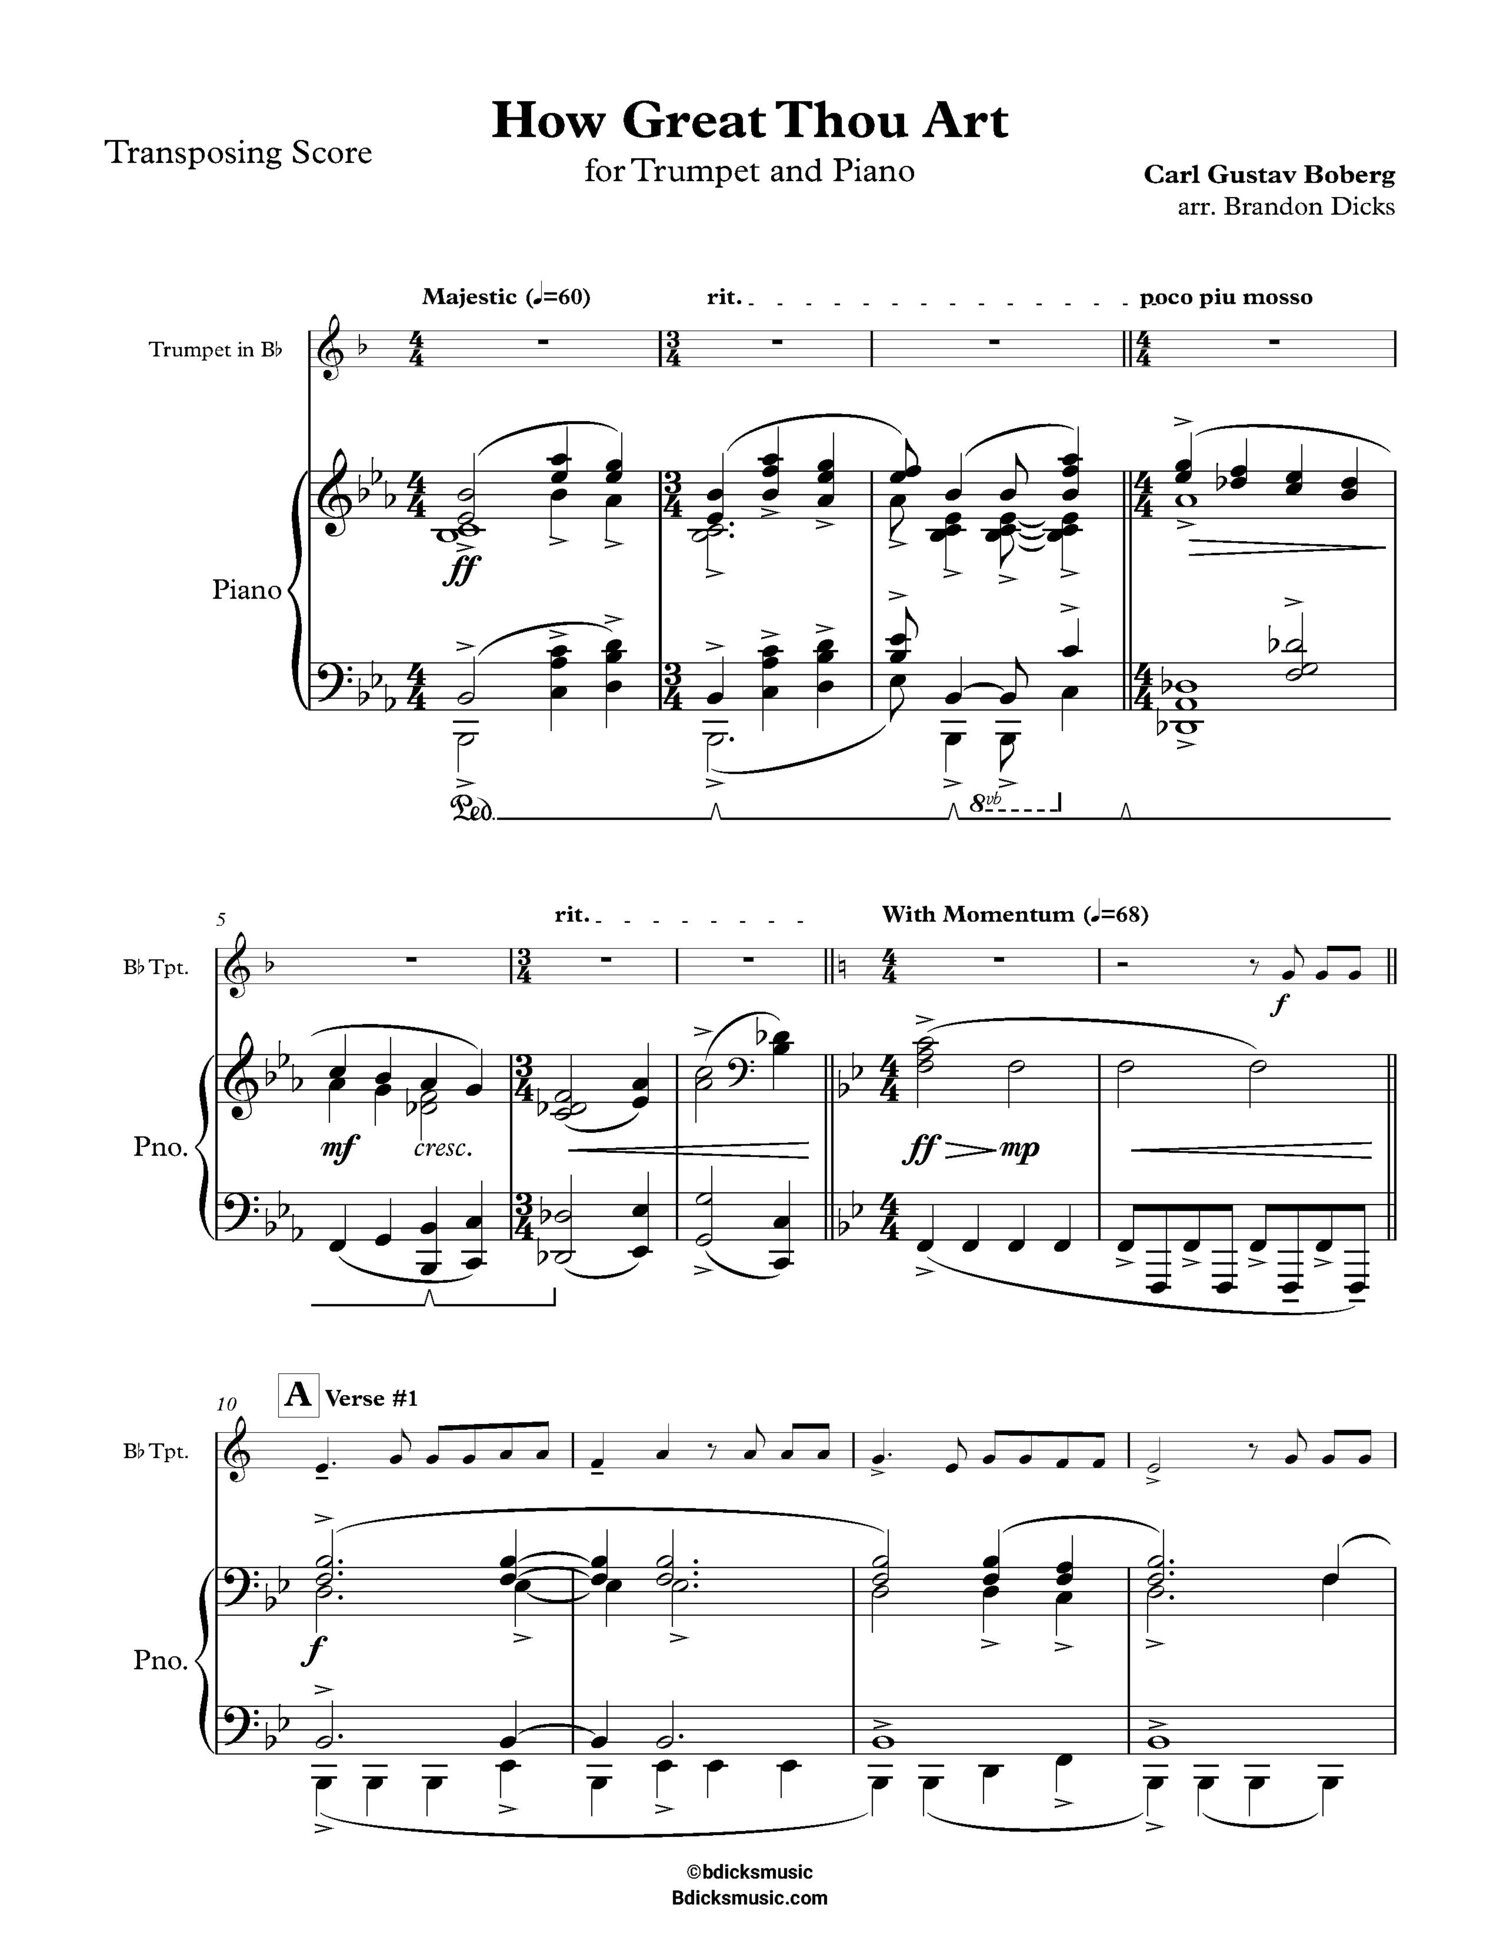 How Great Thou Art  for Trumpet and Piano — BDicksmusic Sheet Music